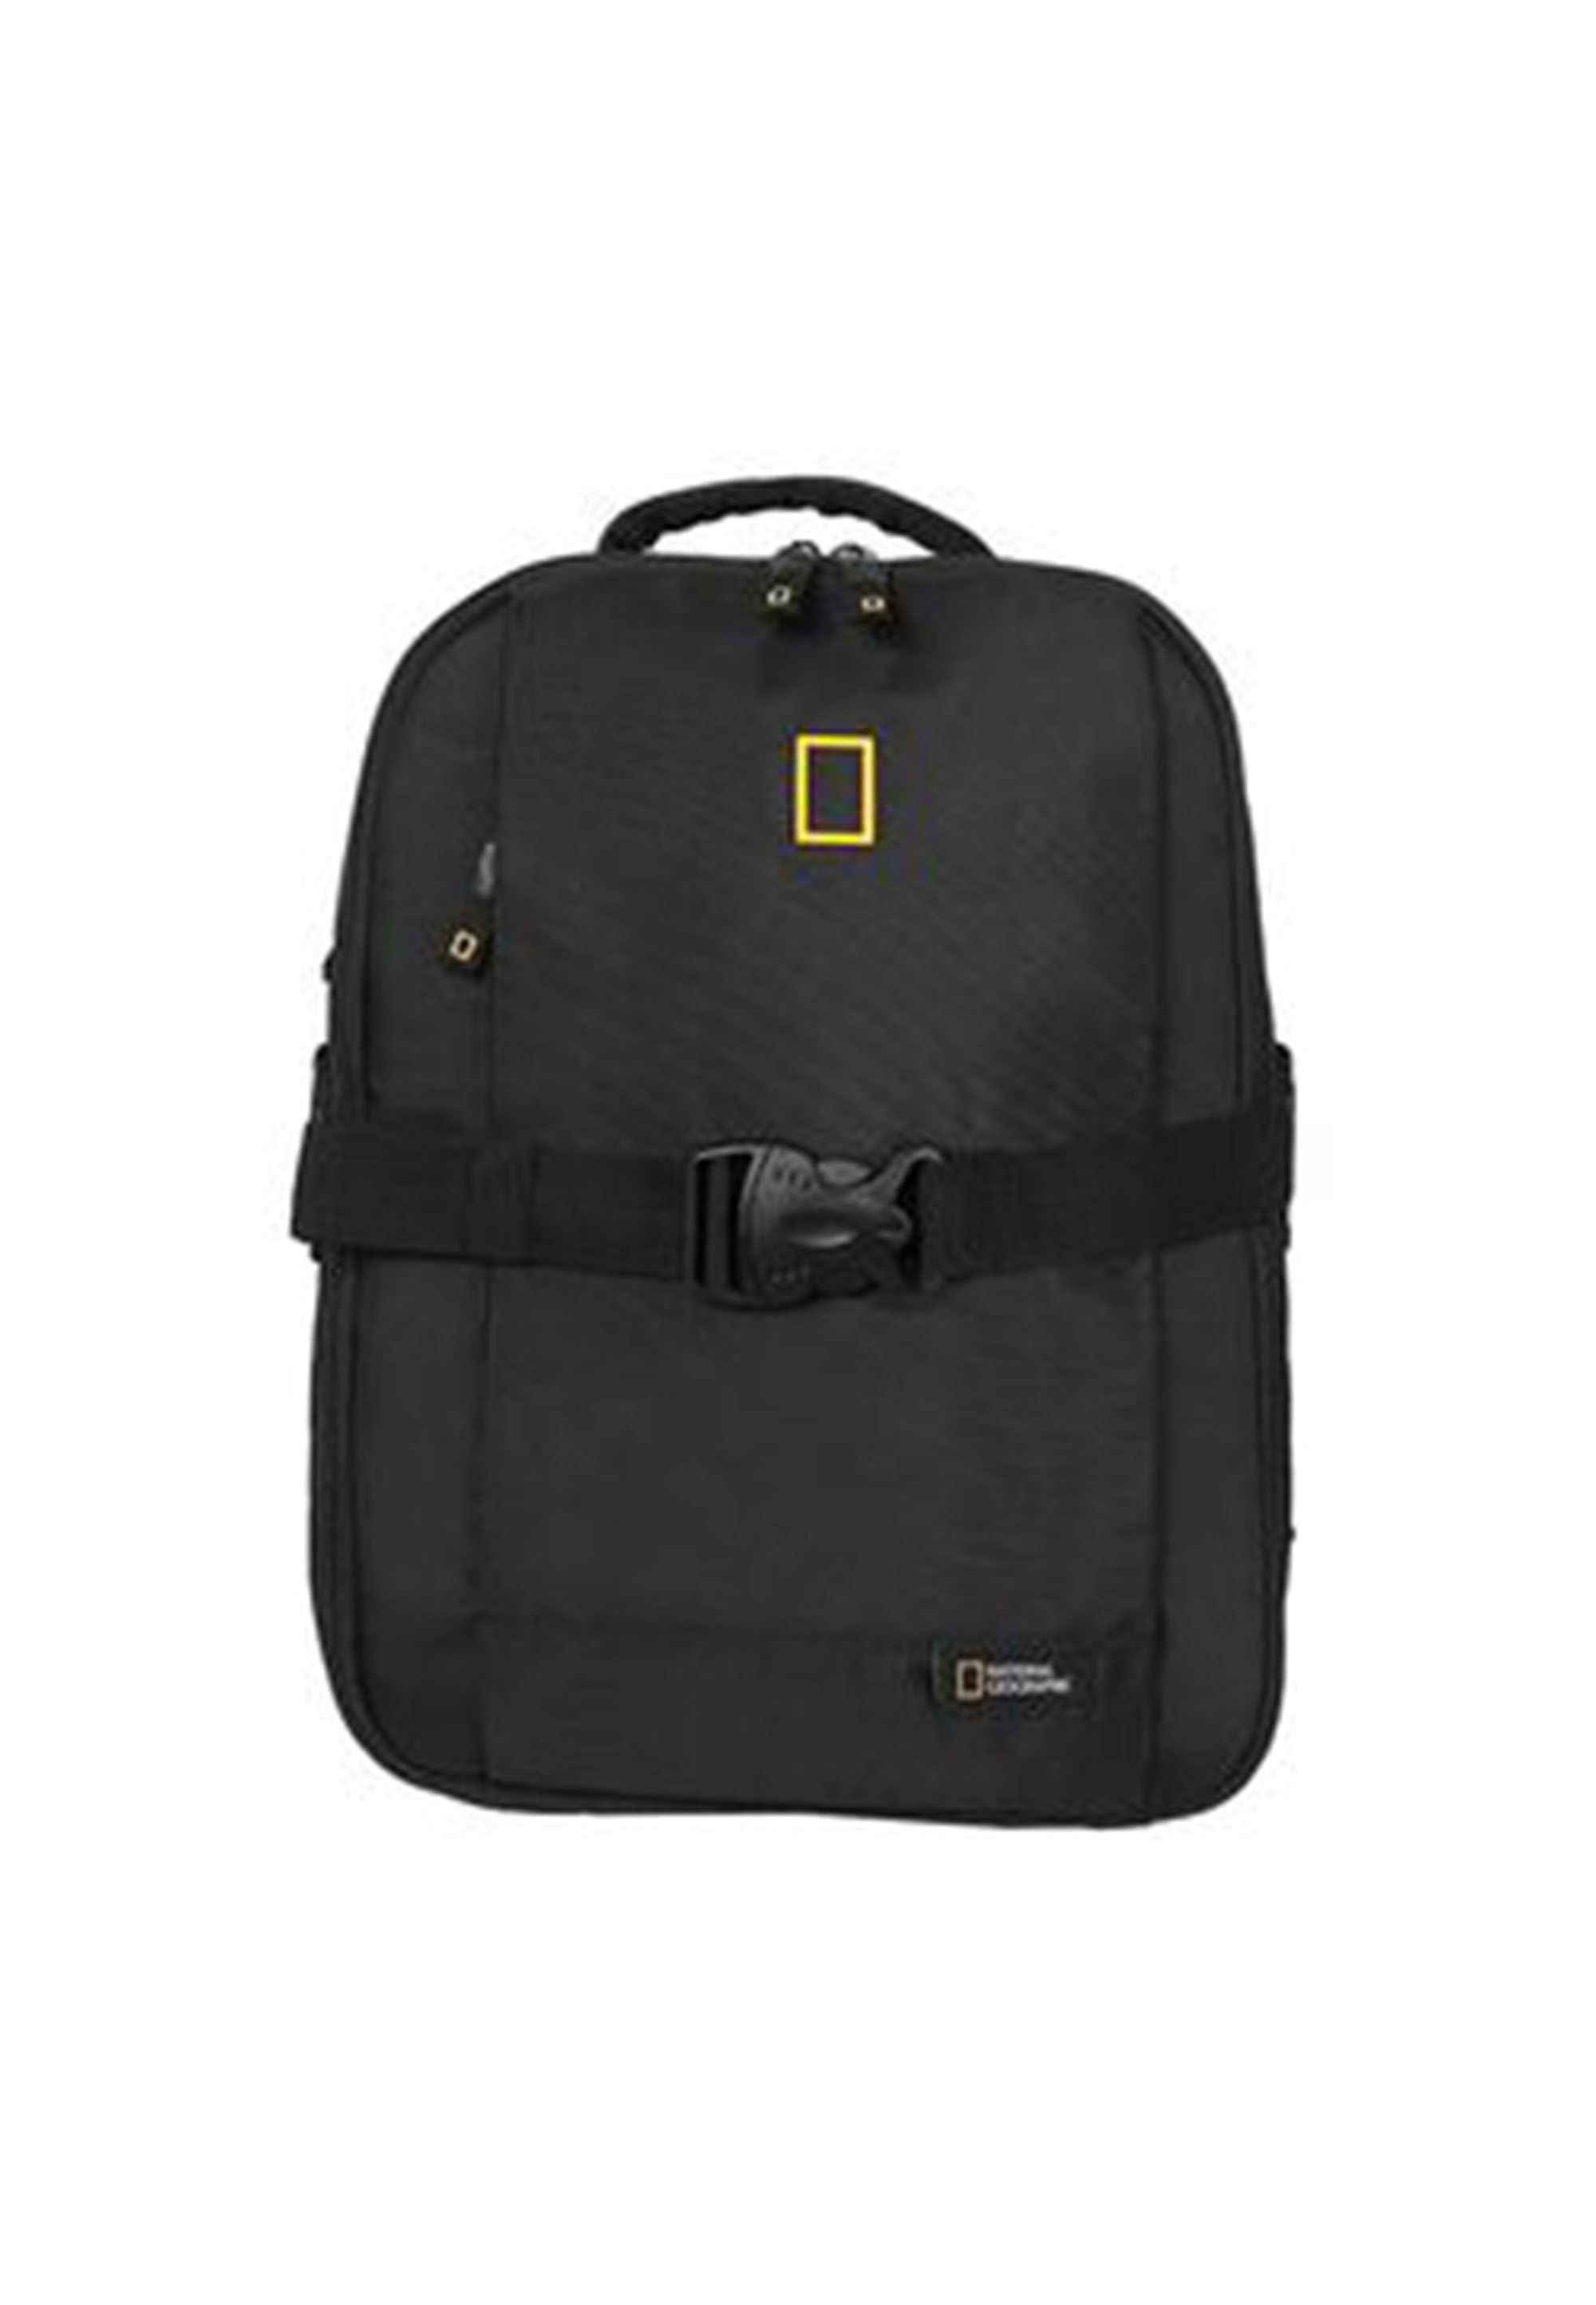 Cityrucksack »Recovery«, aus robustem Polyester-Material mit funktionellem Design